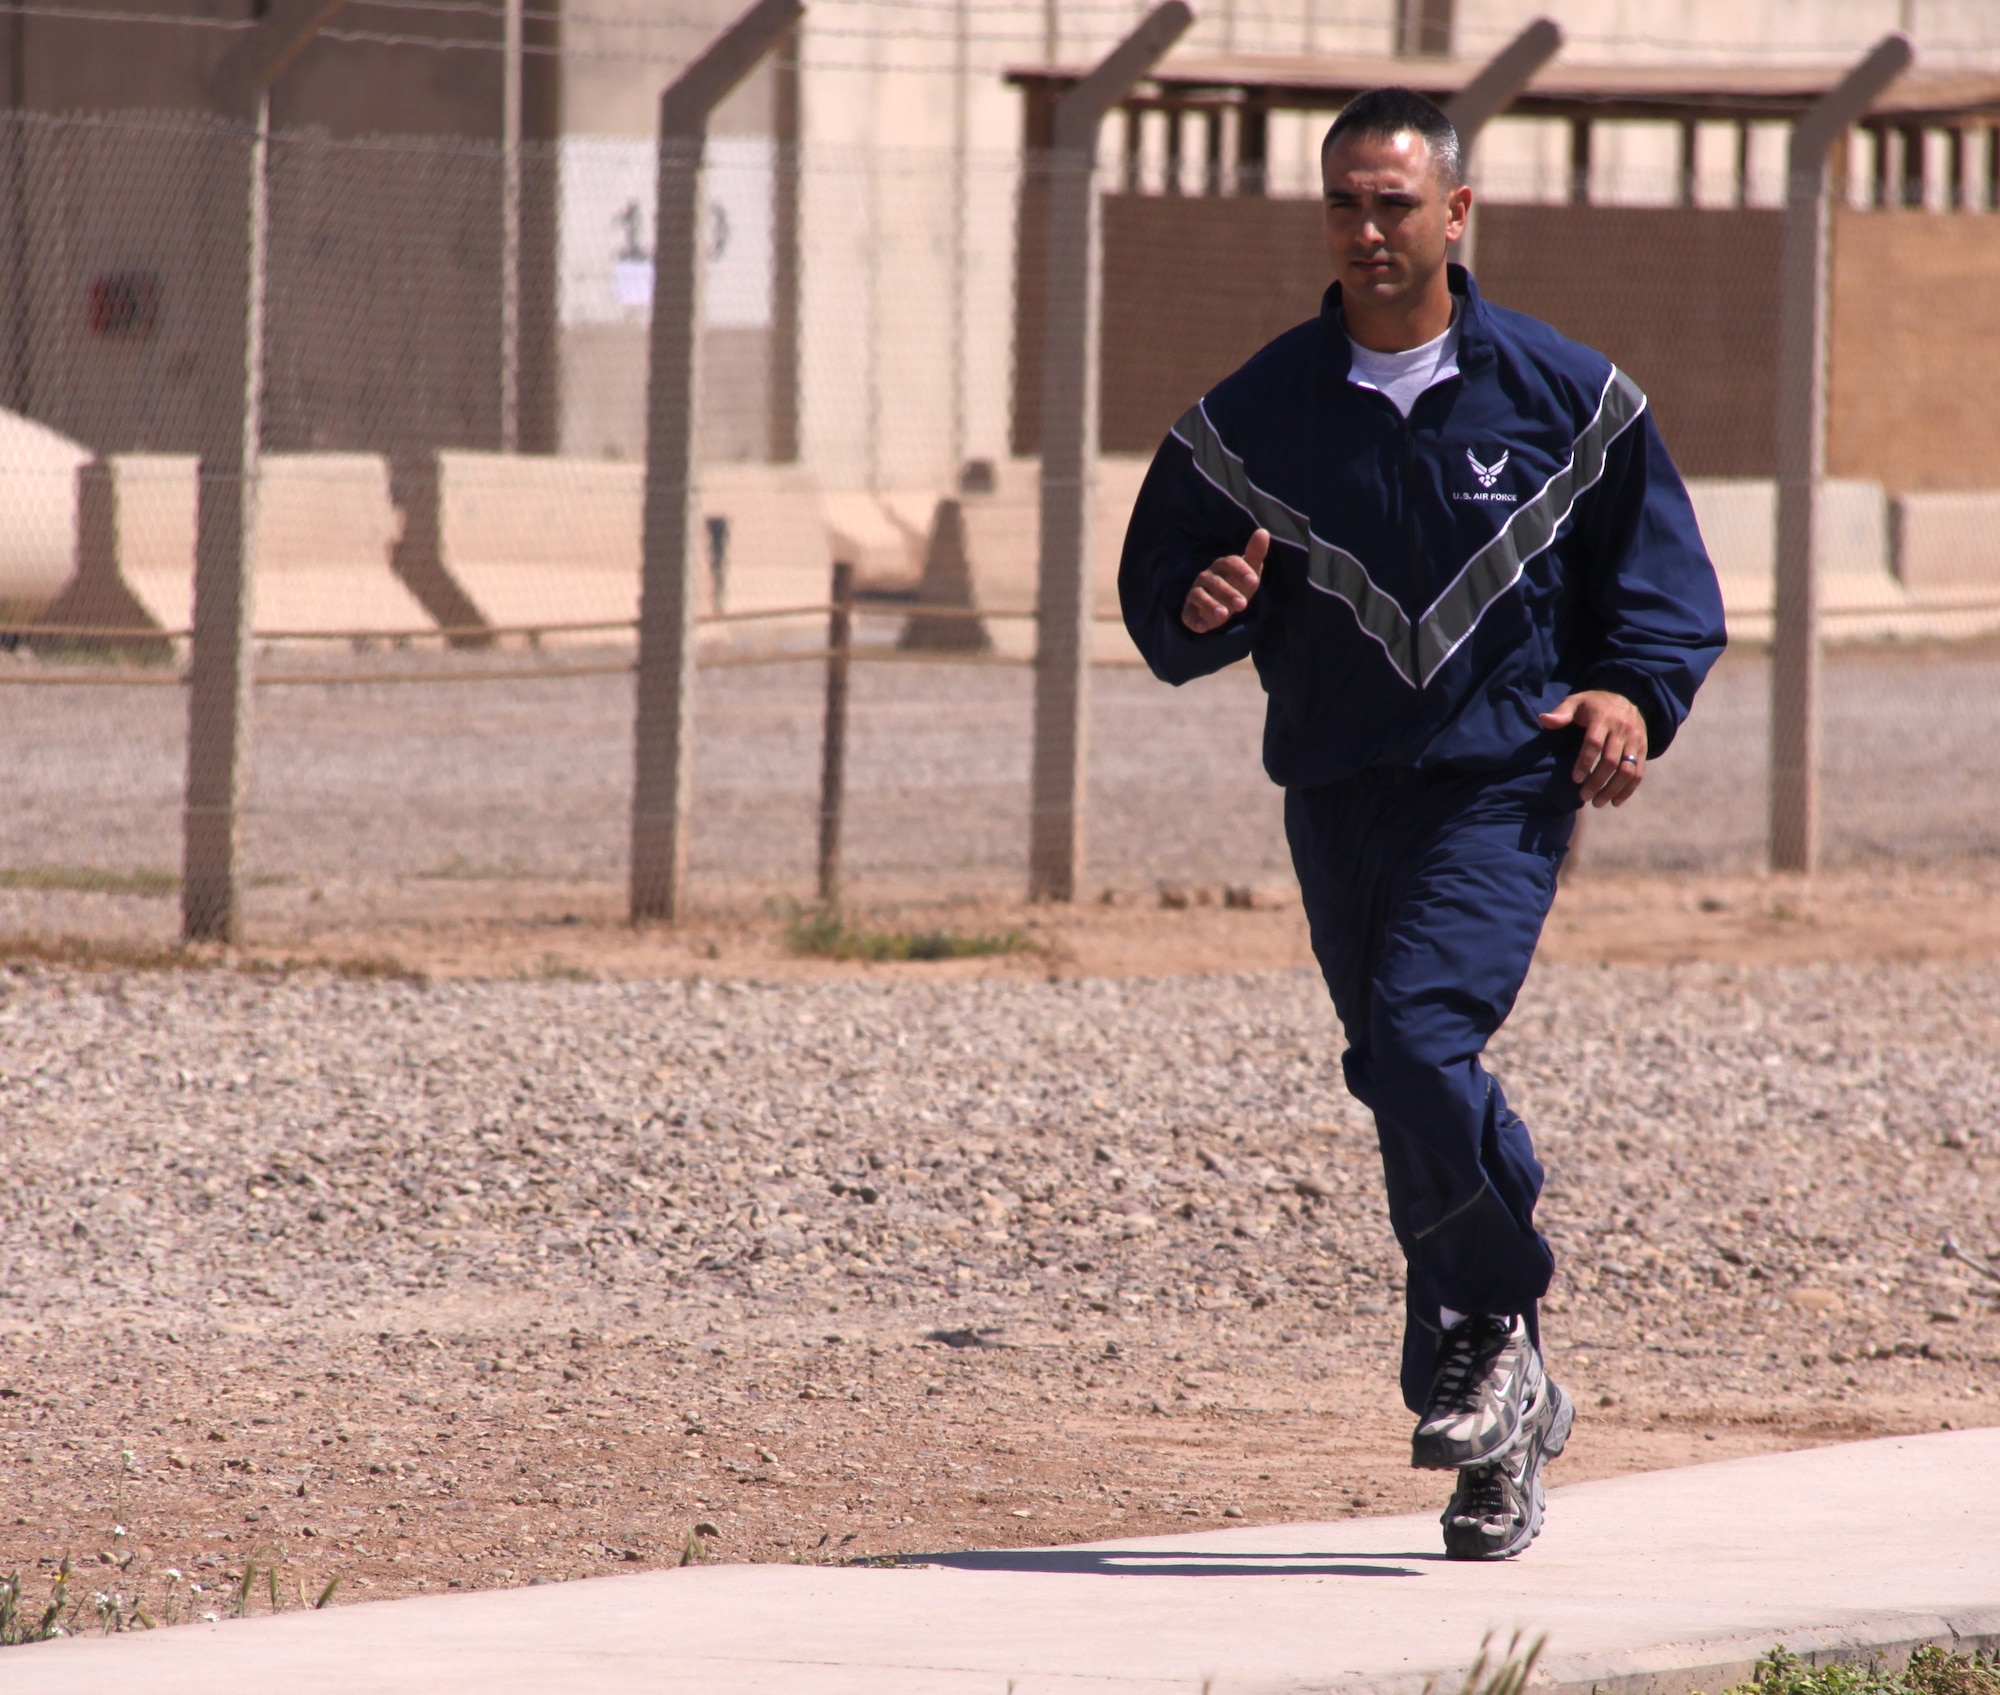 JOINT BASE BALAD, Iraq -- Senior Airman James Debiase, 332nd Expeditionary Civil Engineer Squadron emergency manager, goes for a run around JBB here April 13 to try out the Air Force's modified physical training uniform that is under consideration to replace the current PT uniform. Airman Debiase was selected to field-test the PT uniform while deployed here from Dyess Air Force Base, Texas, and to provide feedback to leadership at the end of April.  Sergeant Debiase's hometown is Glastonbury, Conn. (U.S. Air Force photo/Tech. Sgt. Lionel Castellano)   